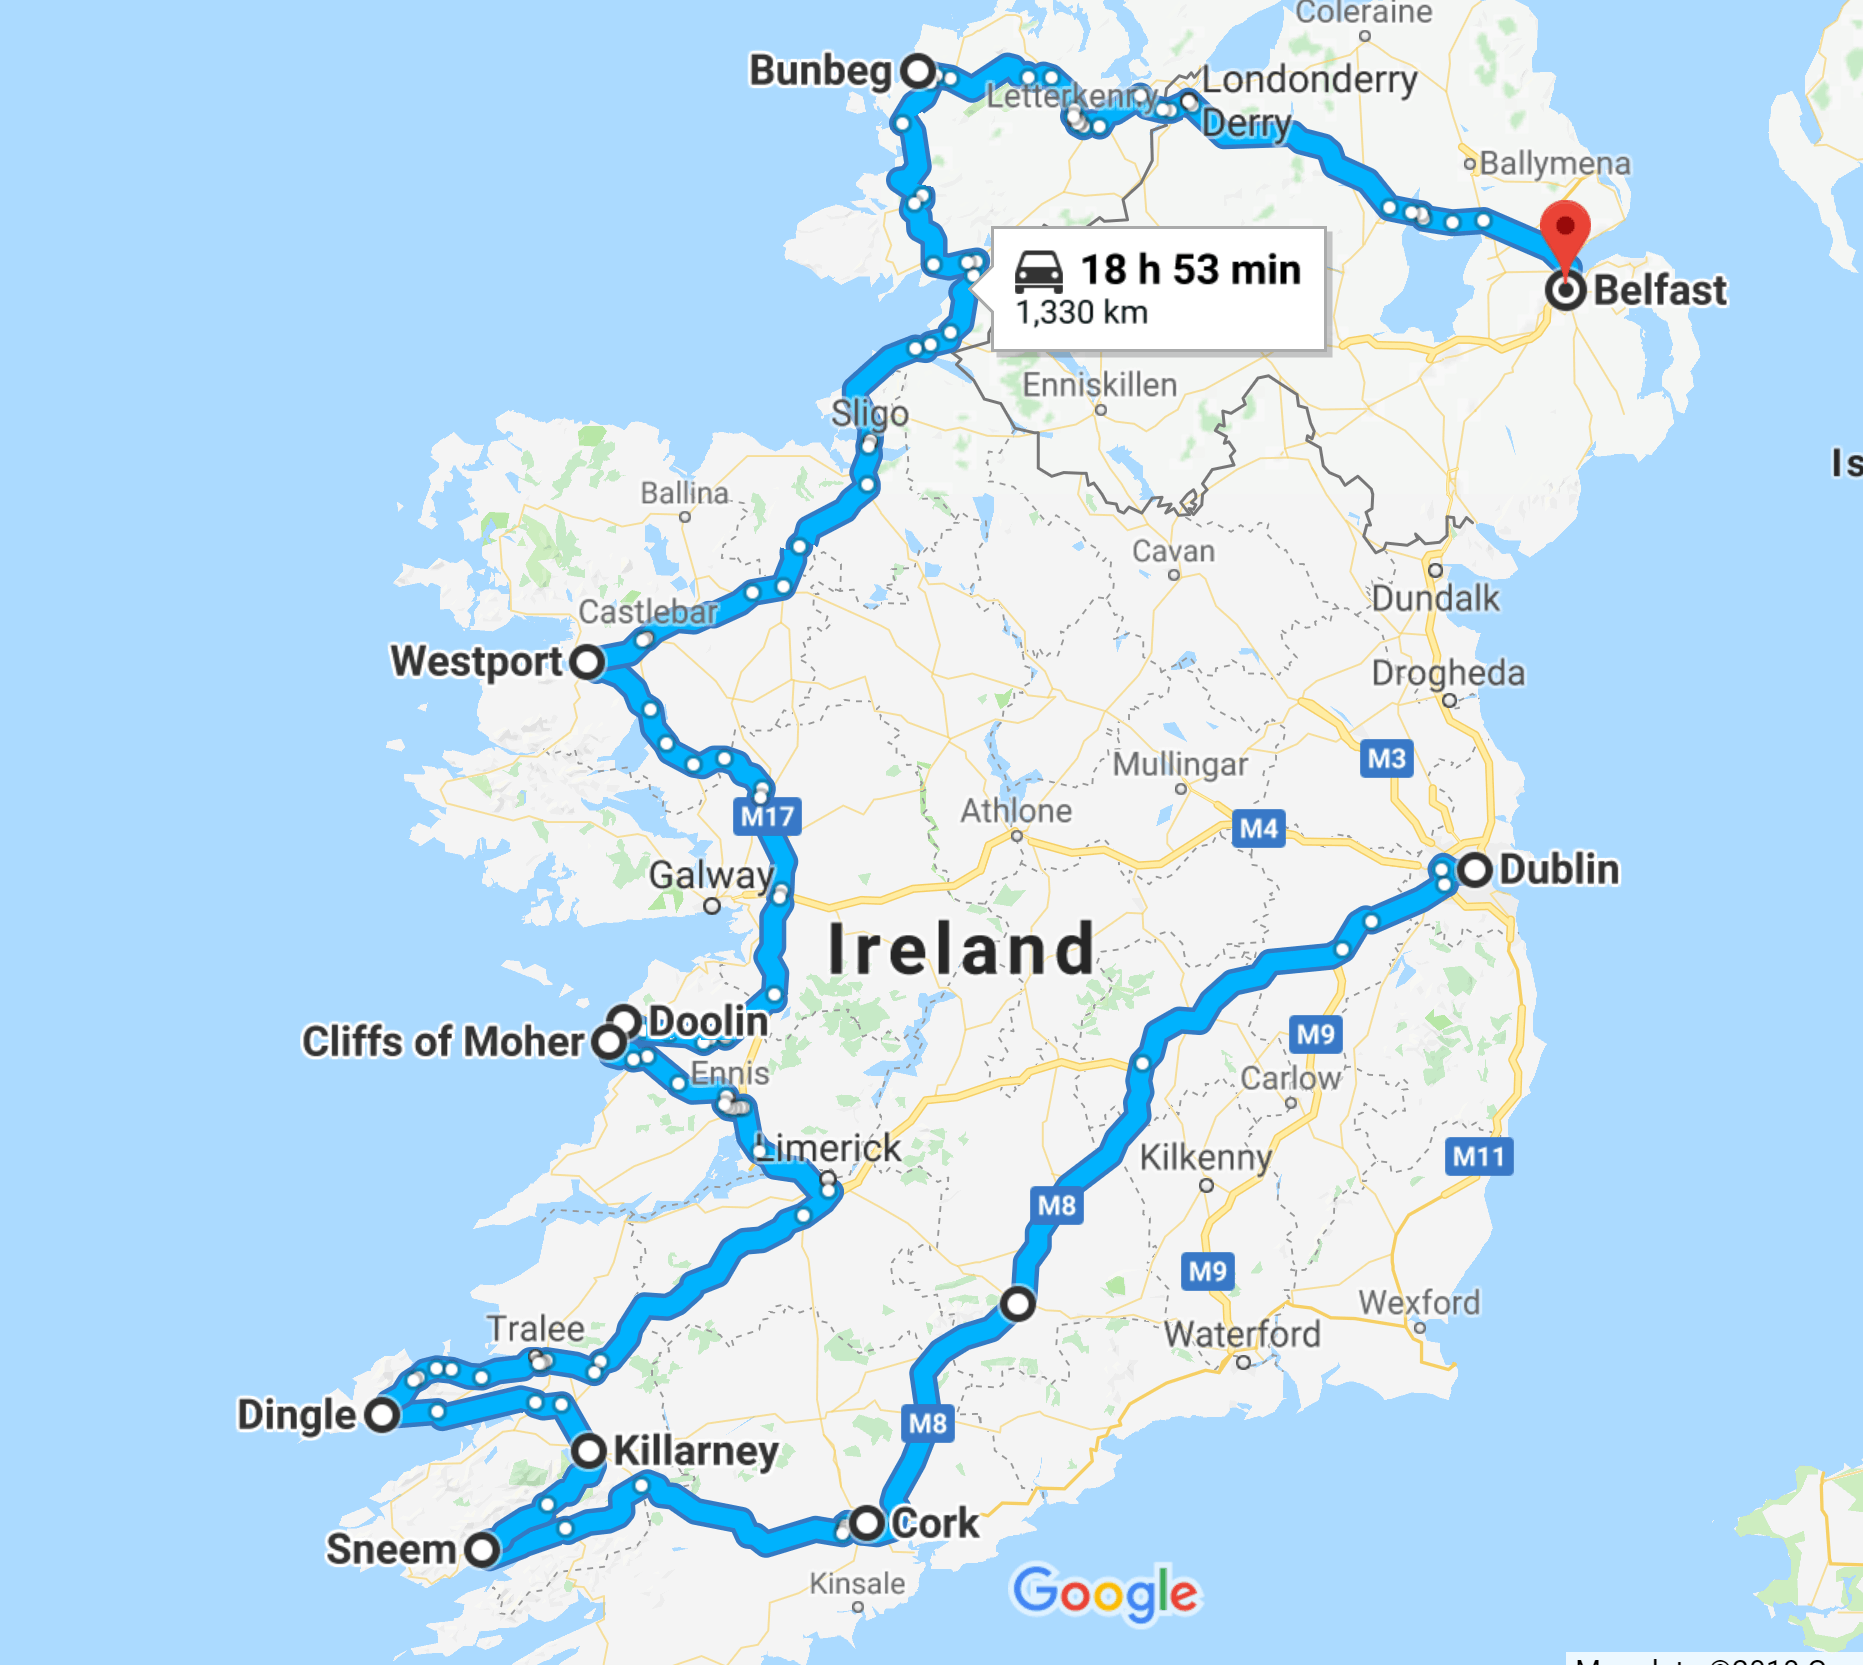 Google Maps image of the Ireland road trip starting in Dublin and ending in Belfast.